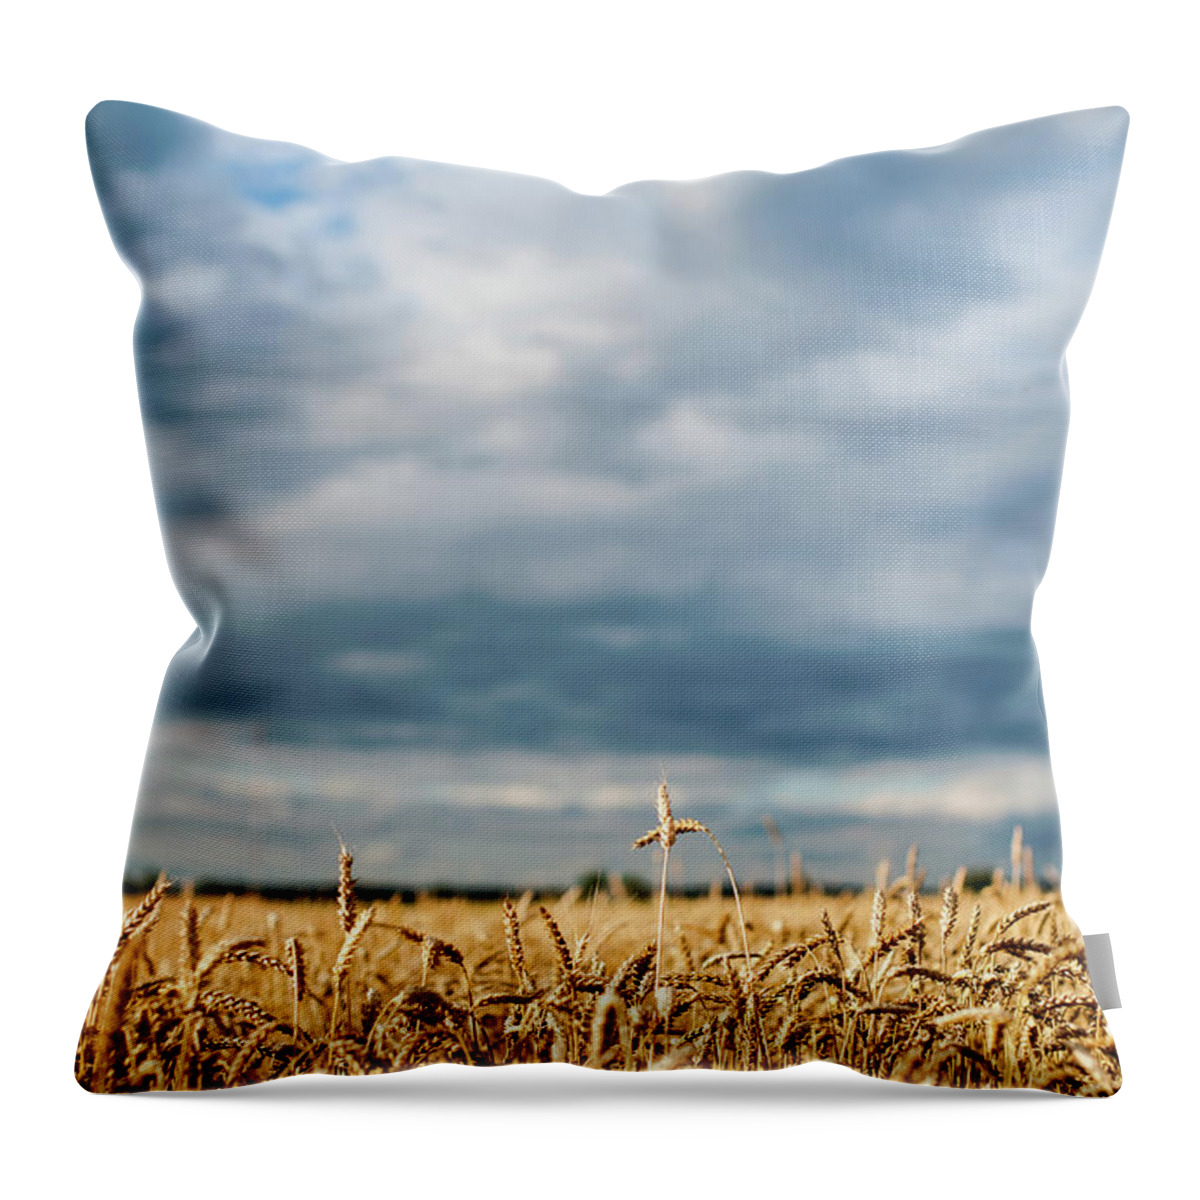 Scenics Throw Pillow featuring the photograph Rey Field And Dark Sky by A. Aleksandravicius